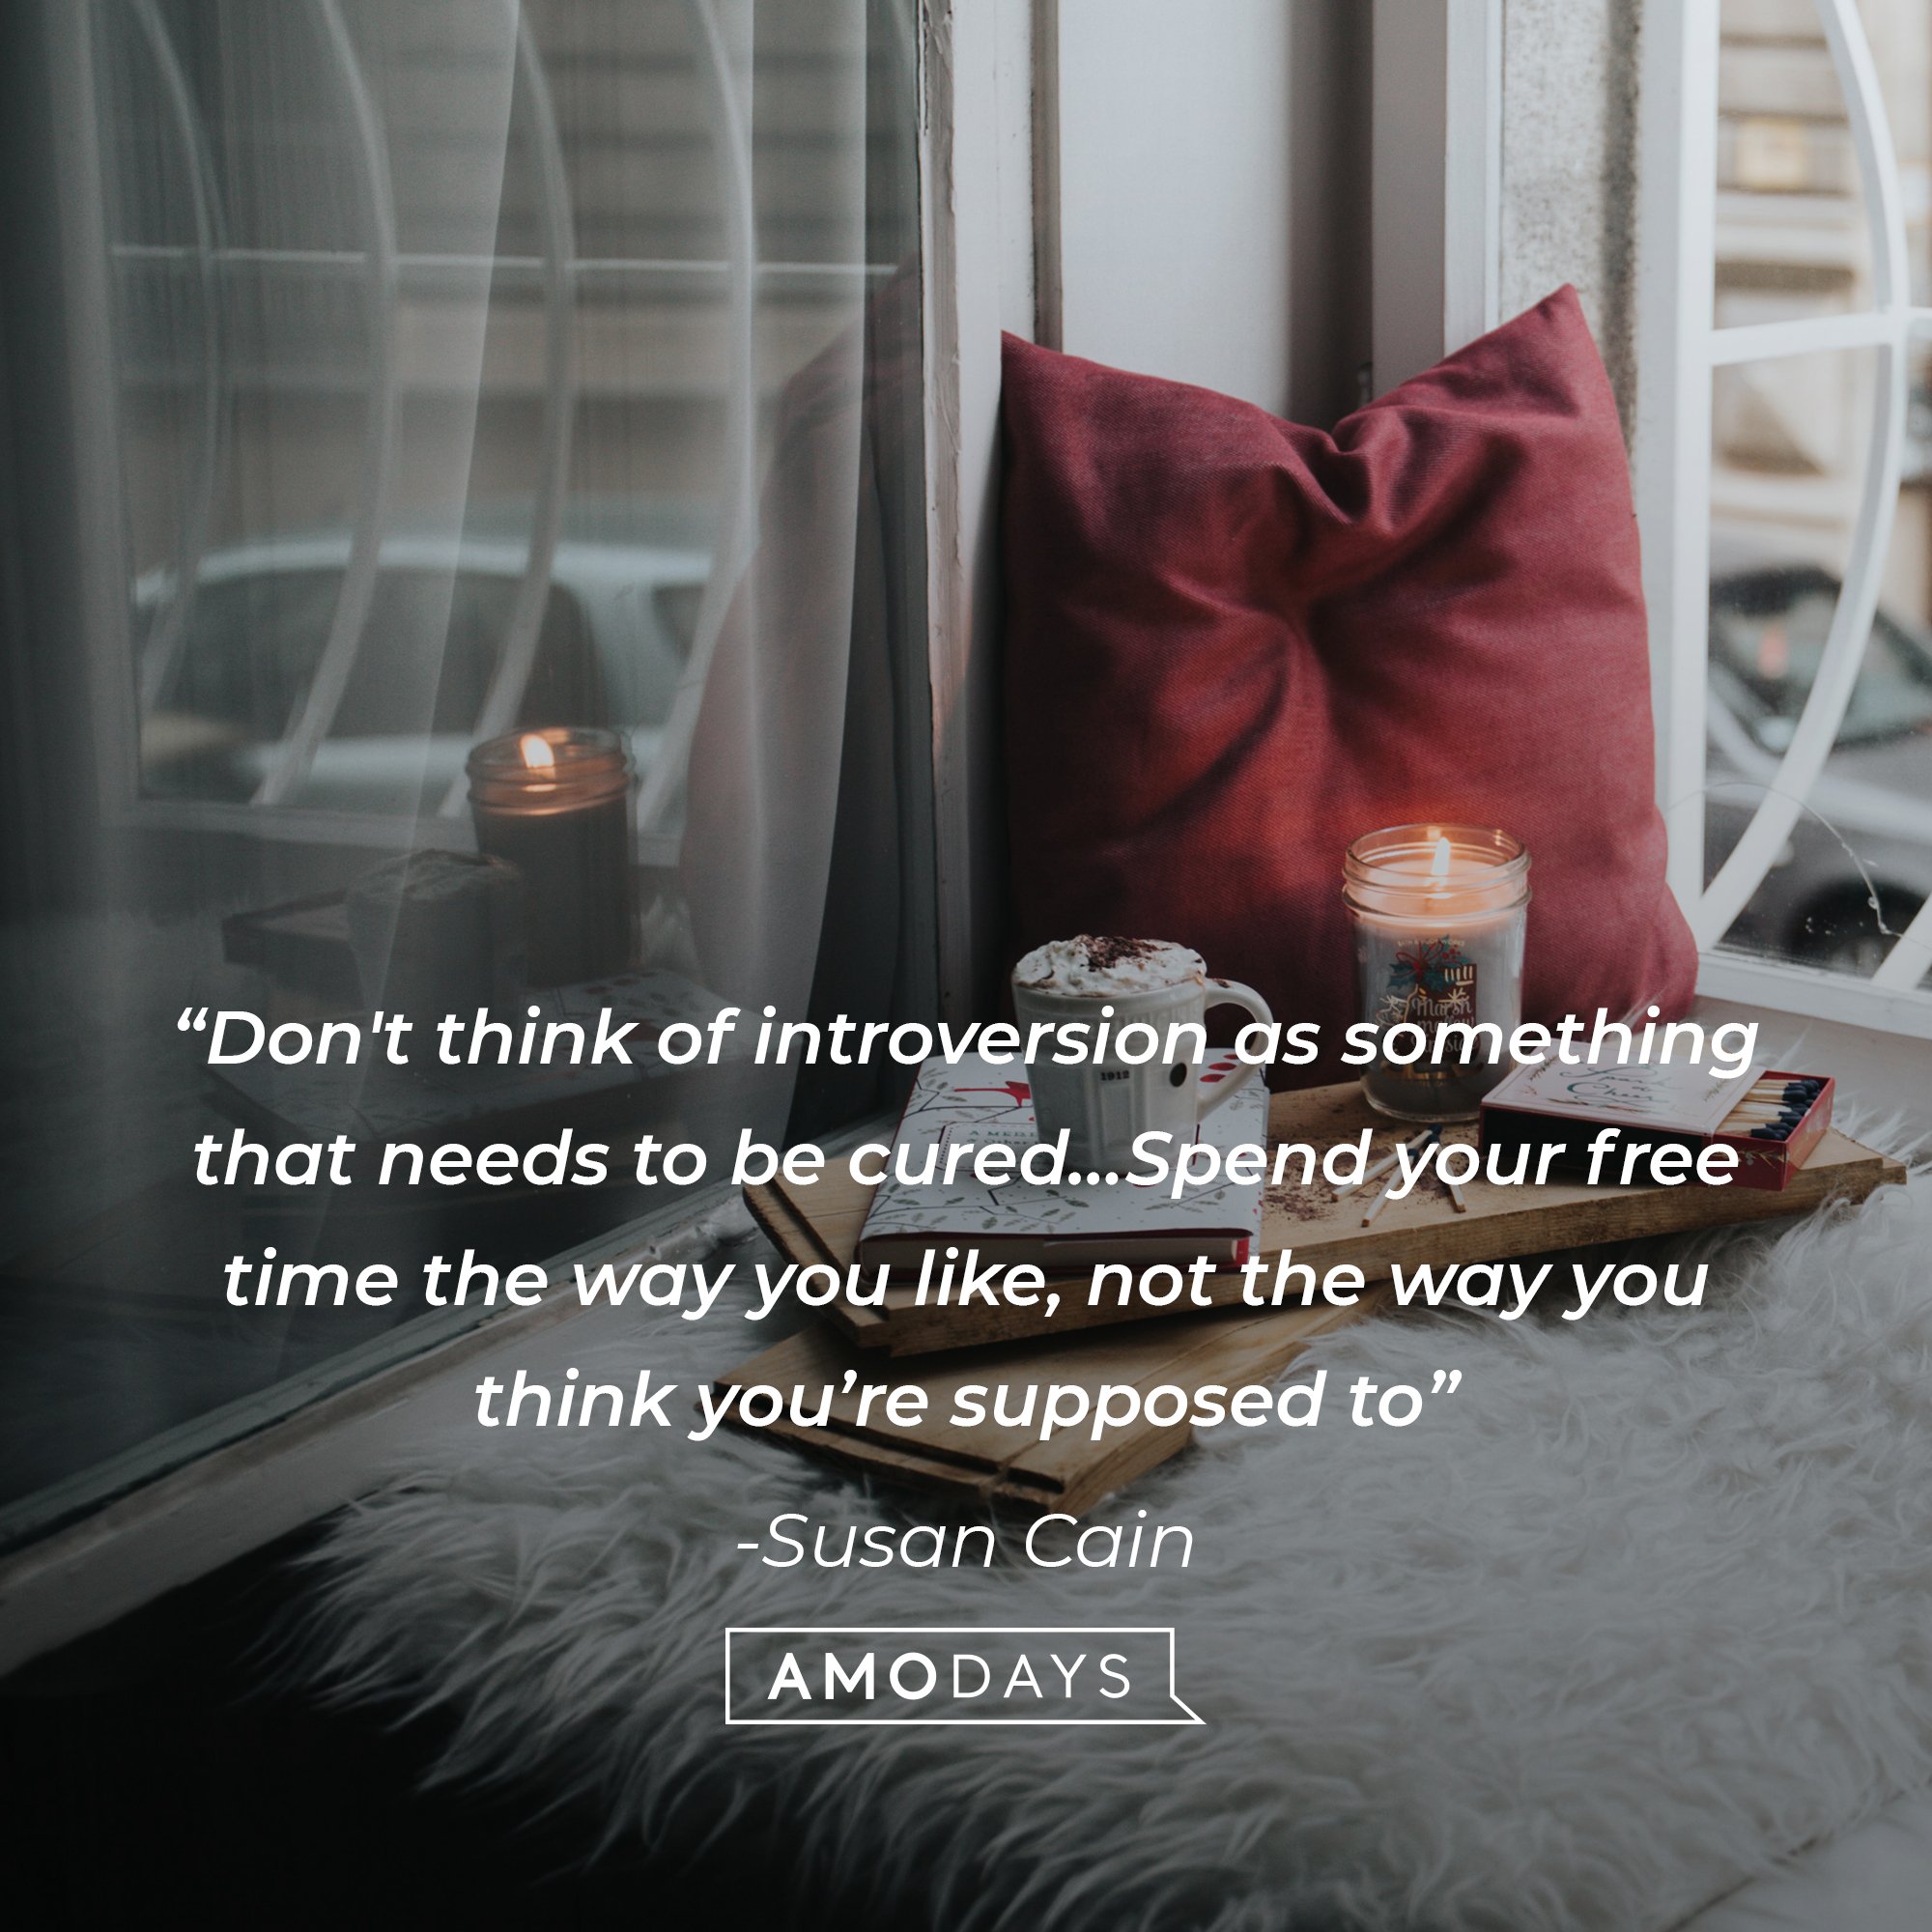 Susan Cain's quote: “Don’t think of introversion as something that needs to be cured… Spend your free time the way you like, not the way you think you’re supposed to.” | Image: AmoDays